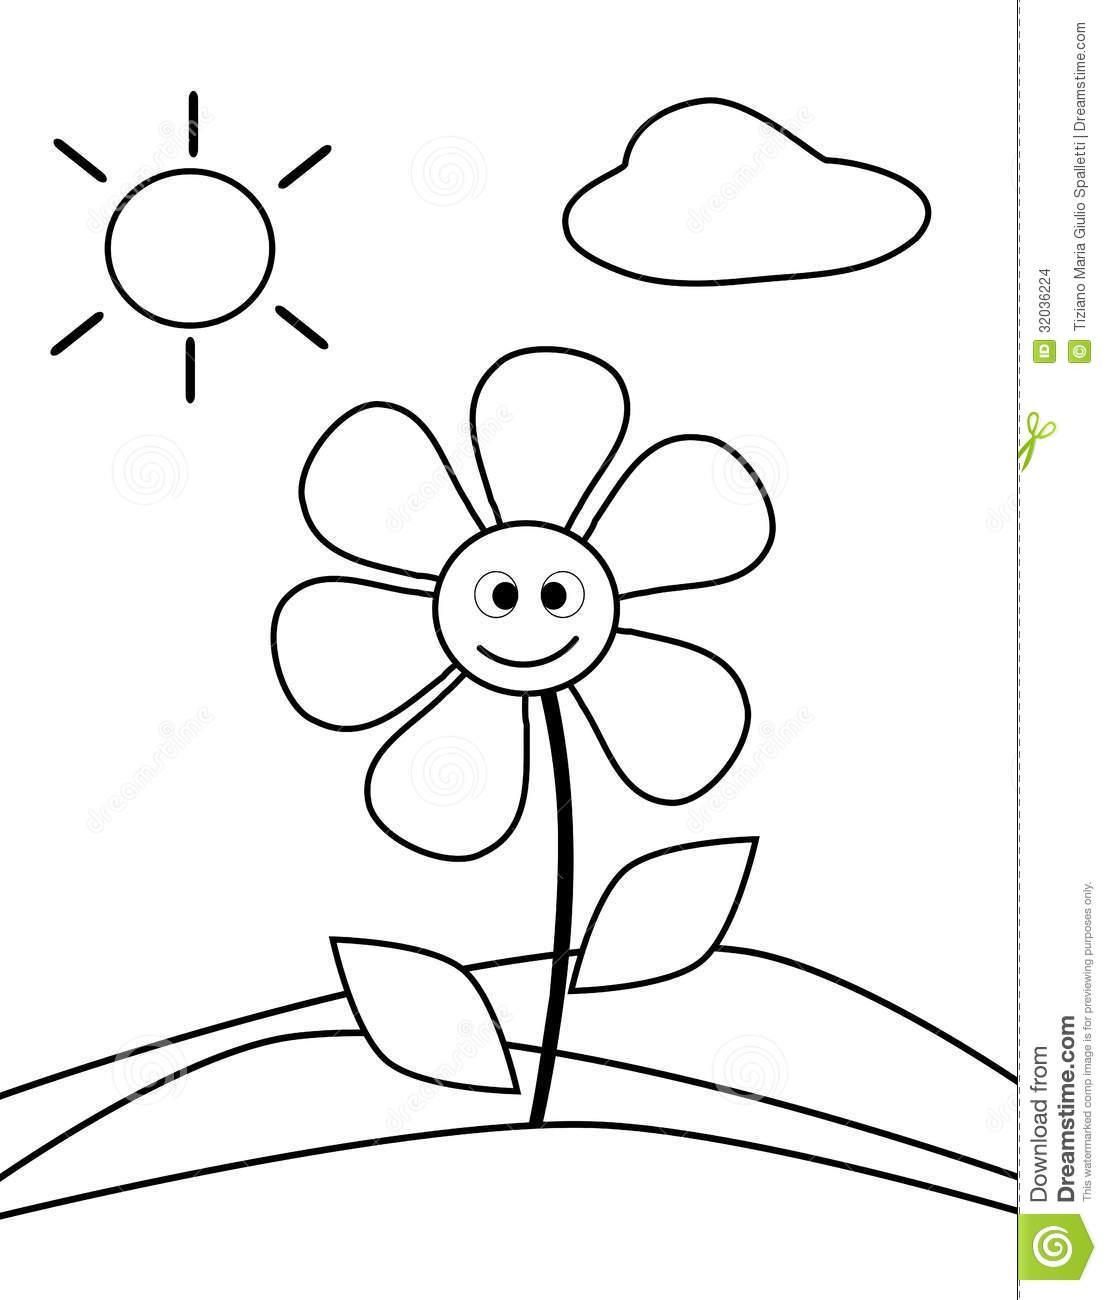 Simple Coloring Pages For 2 Year Olds At GetColorings Free 